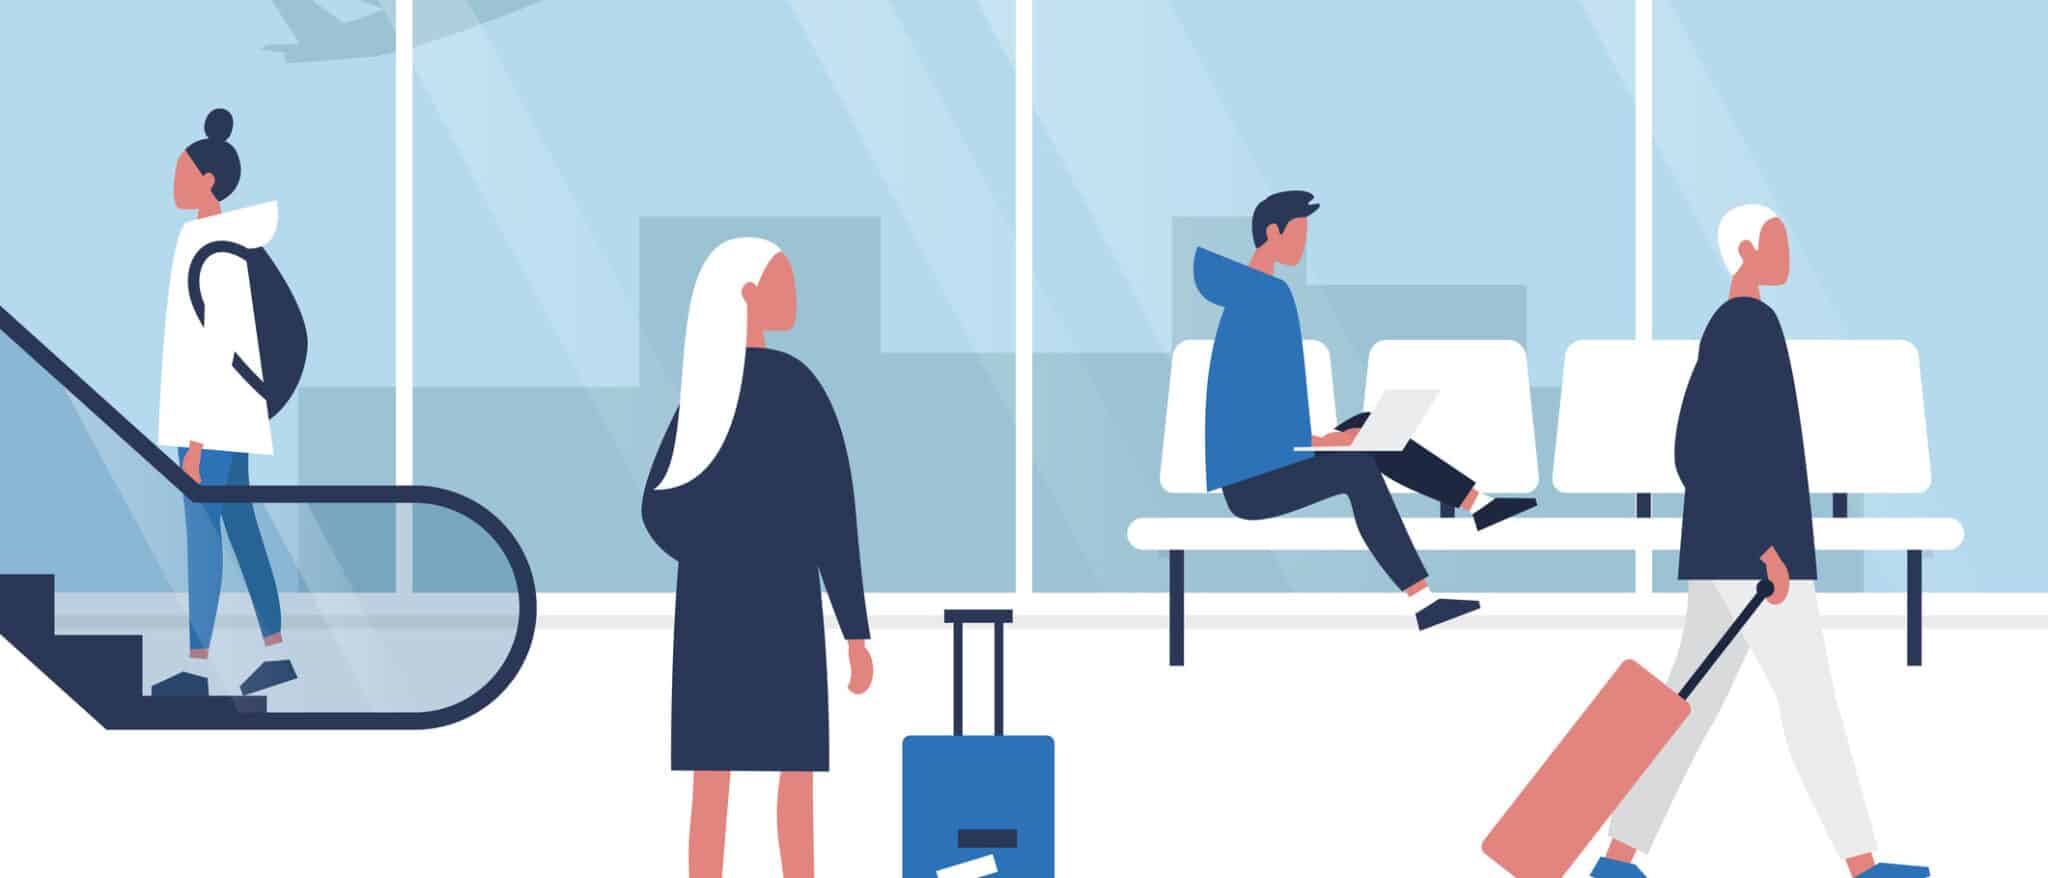 air travel airport illustration of people traveling